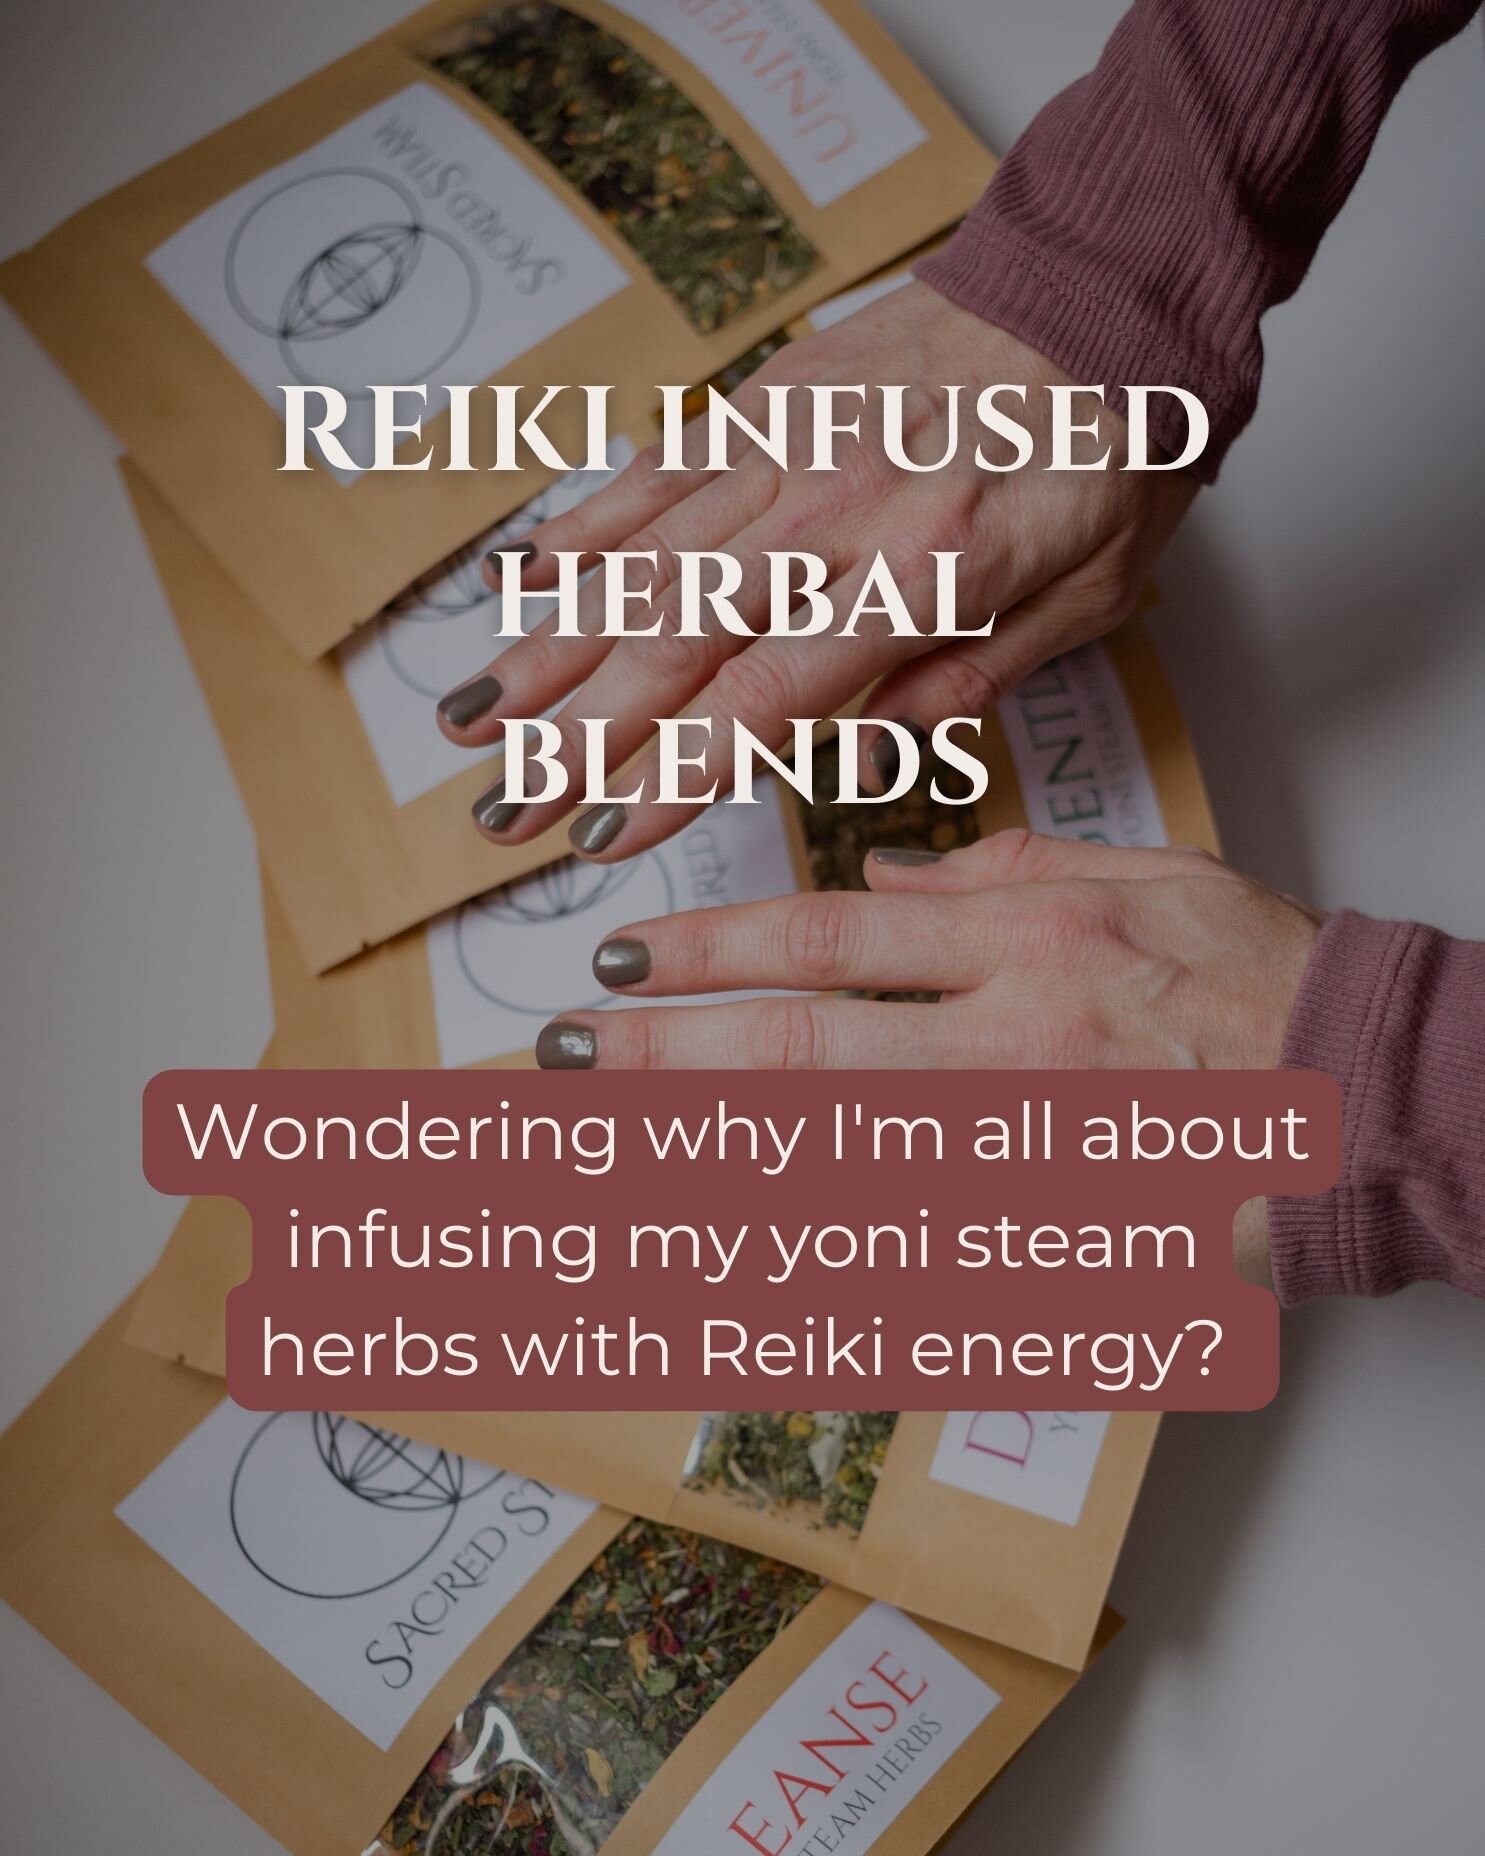 Let me break it down for you...

See, these herbs aren't just about the physical; they're about tapping into the energetic side of things. When I sprinkle in some Reiki, it's like giving those herbs a little energetic boost. We're talking good vibes 